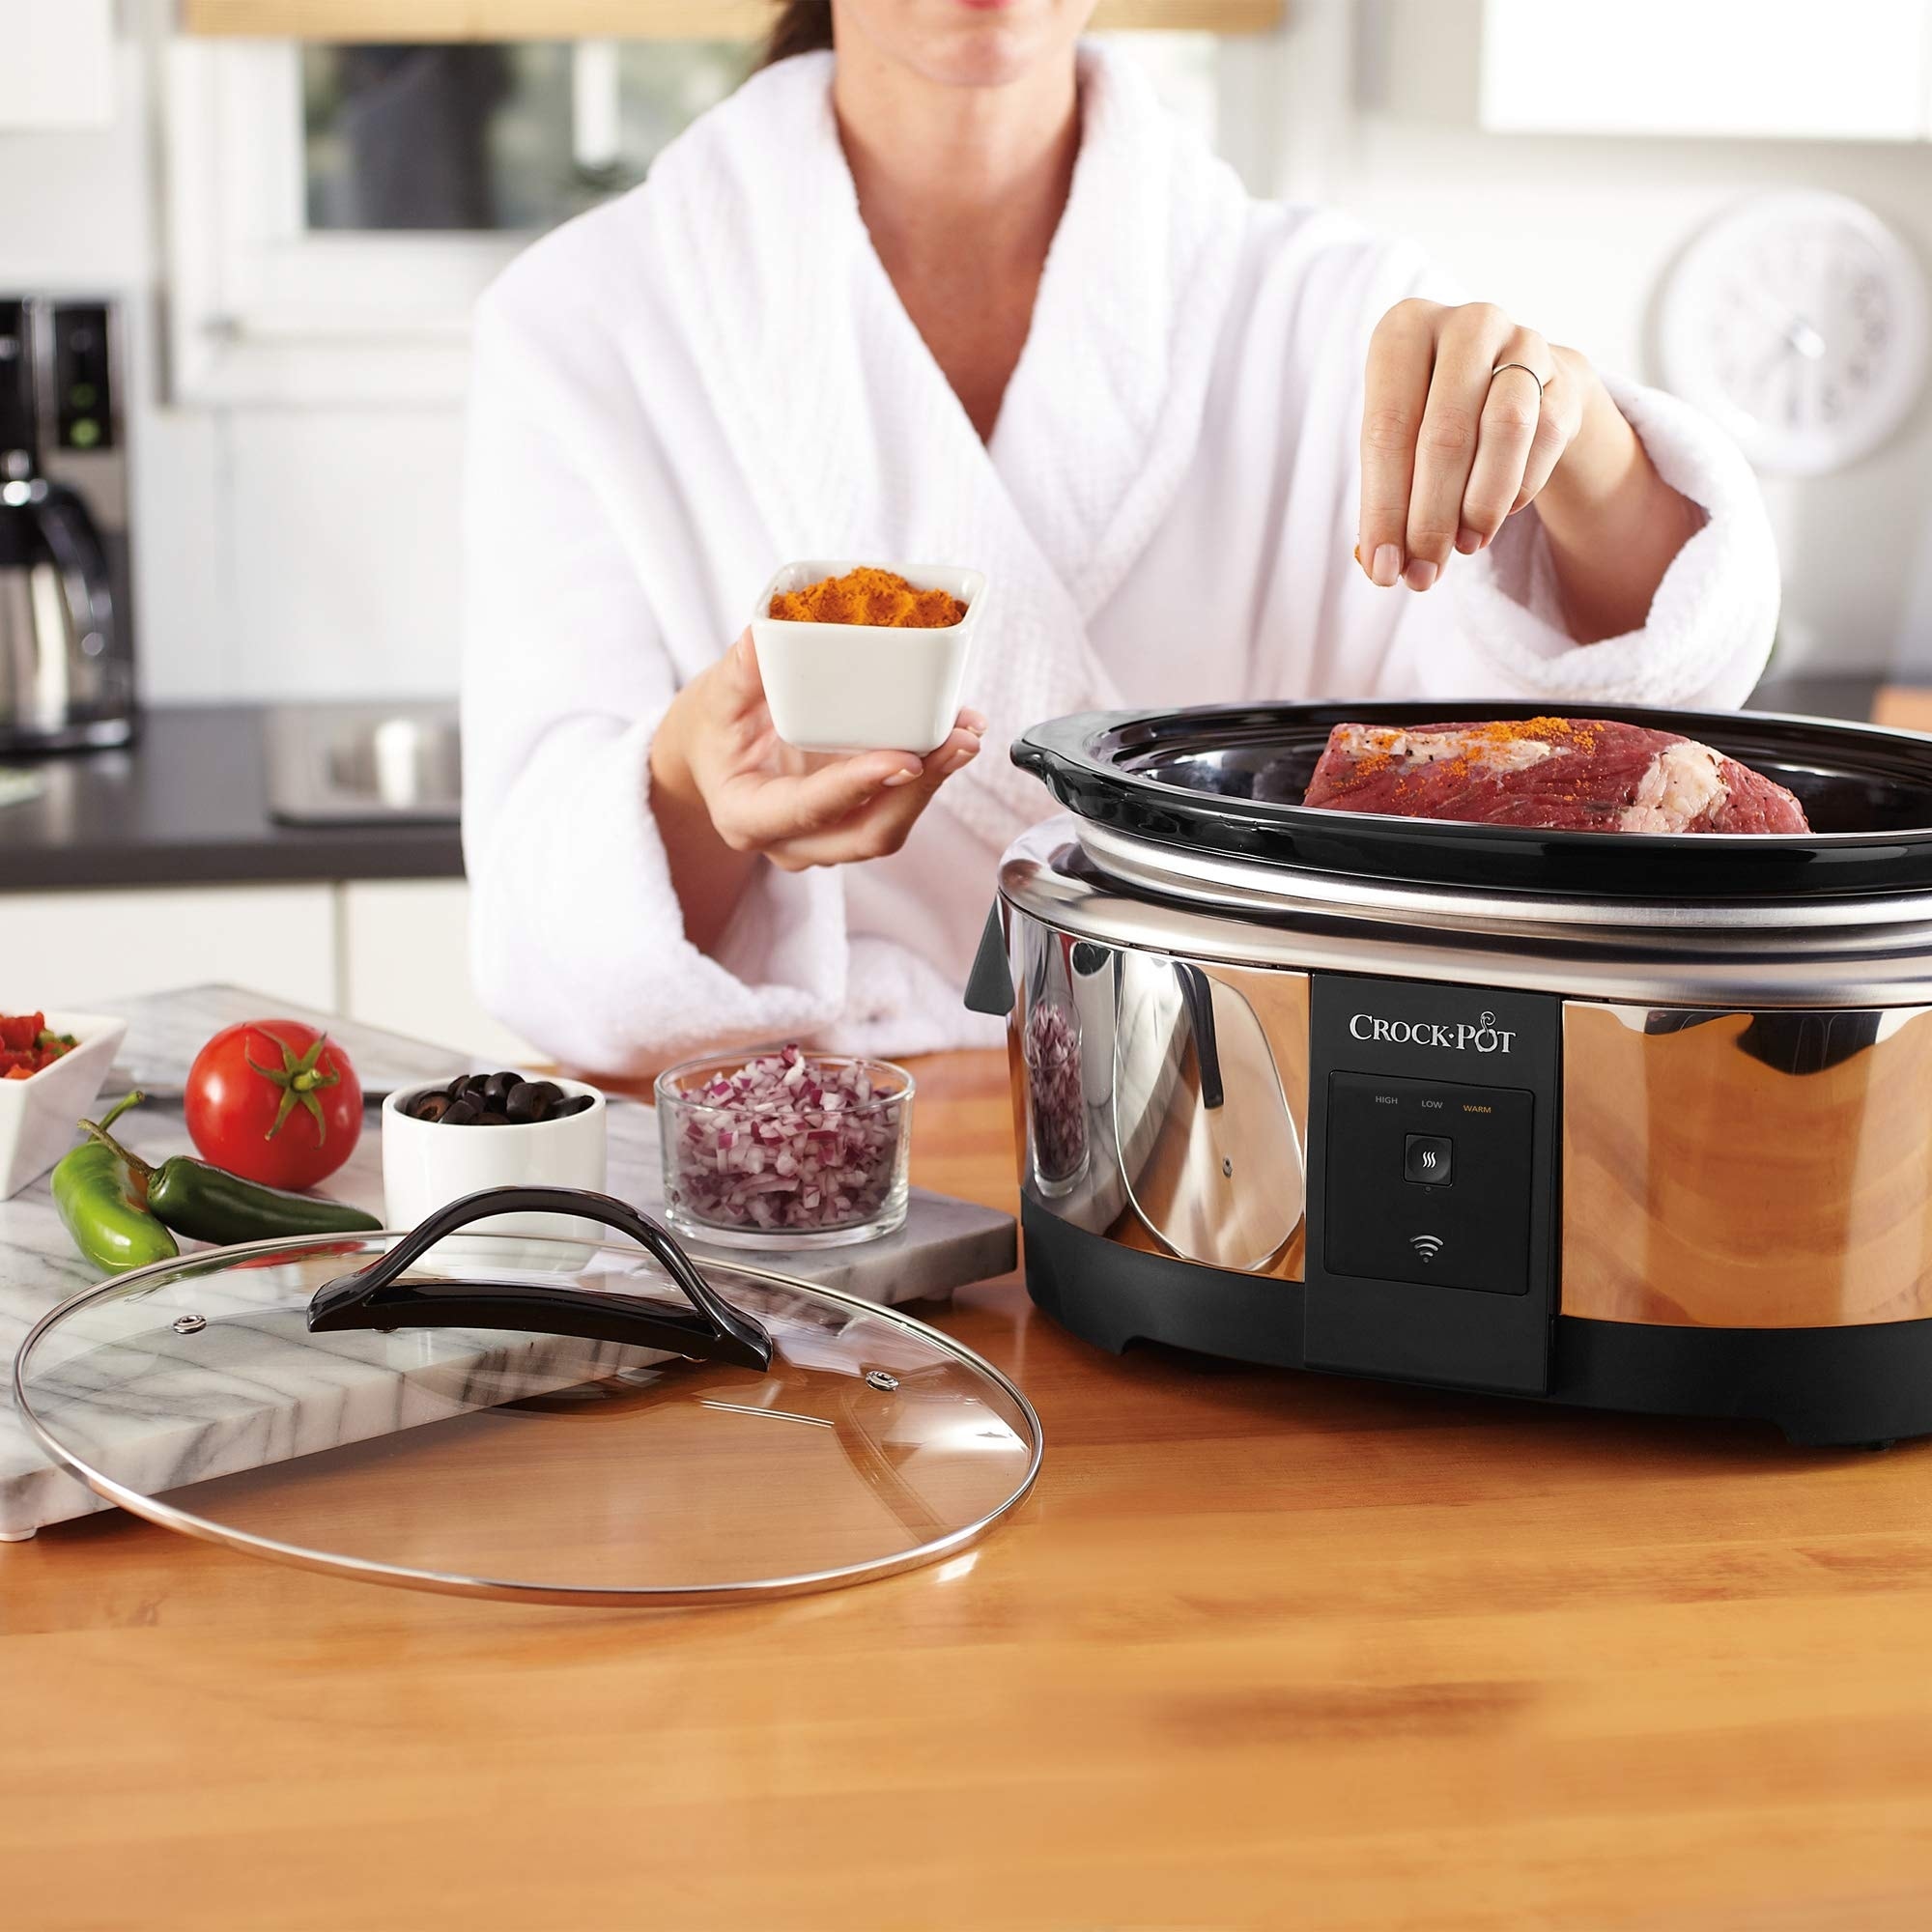 https://ak1.ostkcdn.com/images/products/is/images/direct/6cecd1f2f48485f0a0f8bfa57e24f37a01e24cb8/6-Quart-Programmable-Slow-Cooker-and-Food-Warmer-Works-with-Alexa%2C-Stainless-Steel.jpg